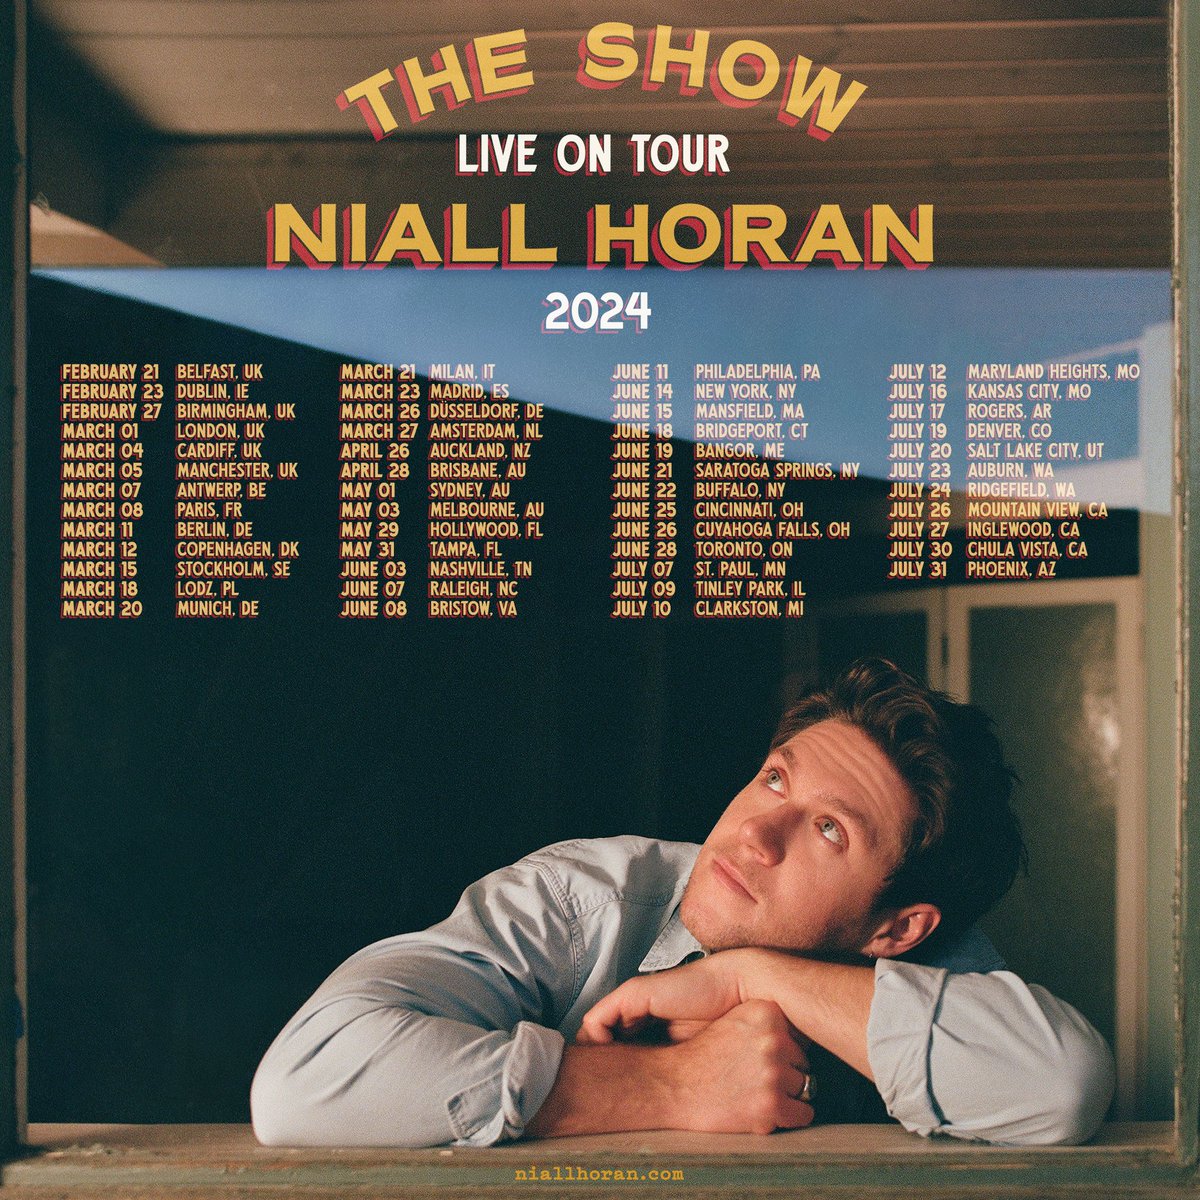 Newsletter presale starts today at 10am local time ! Get your tickets now niallhoran.com